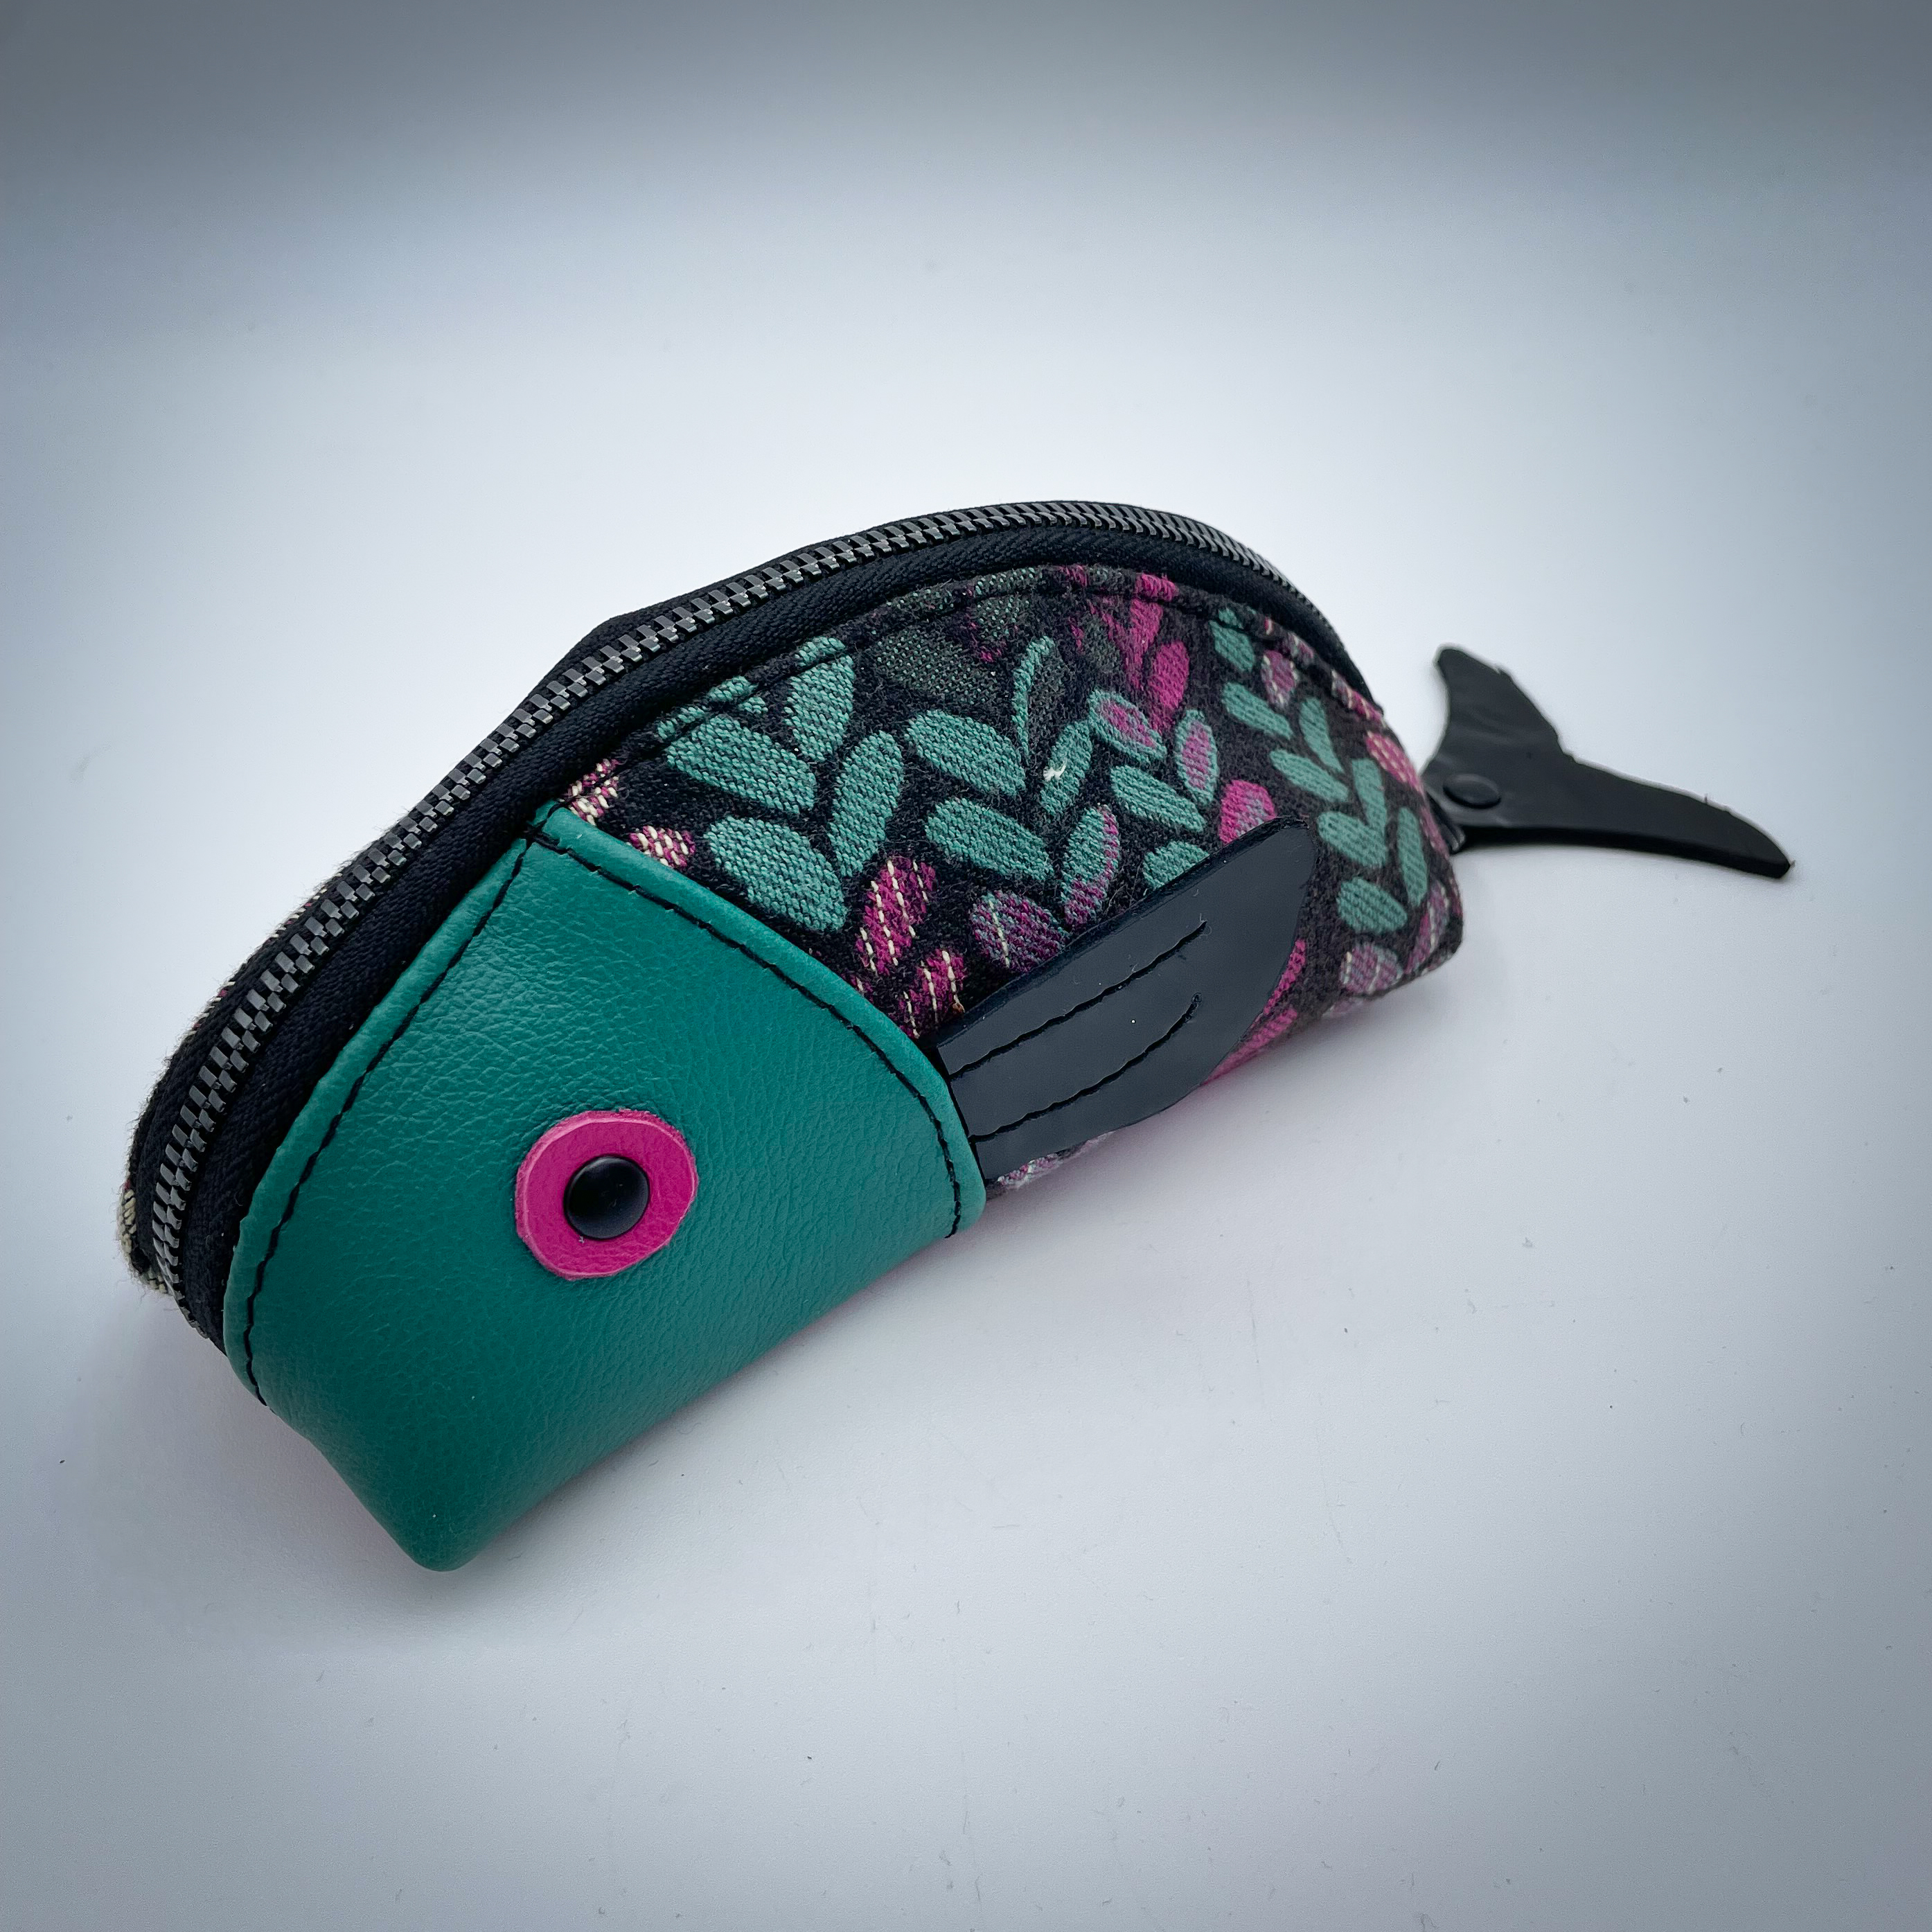 A zippered pouch sewn from sage green leather, black patent leather, fuchsia pink leather, and two scraps of a babywearing wrap with a green, beige, and pink mesh pattern on a black background.